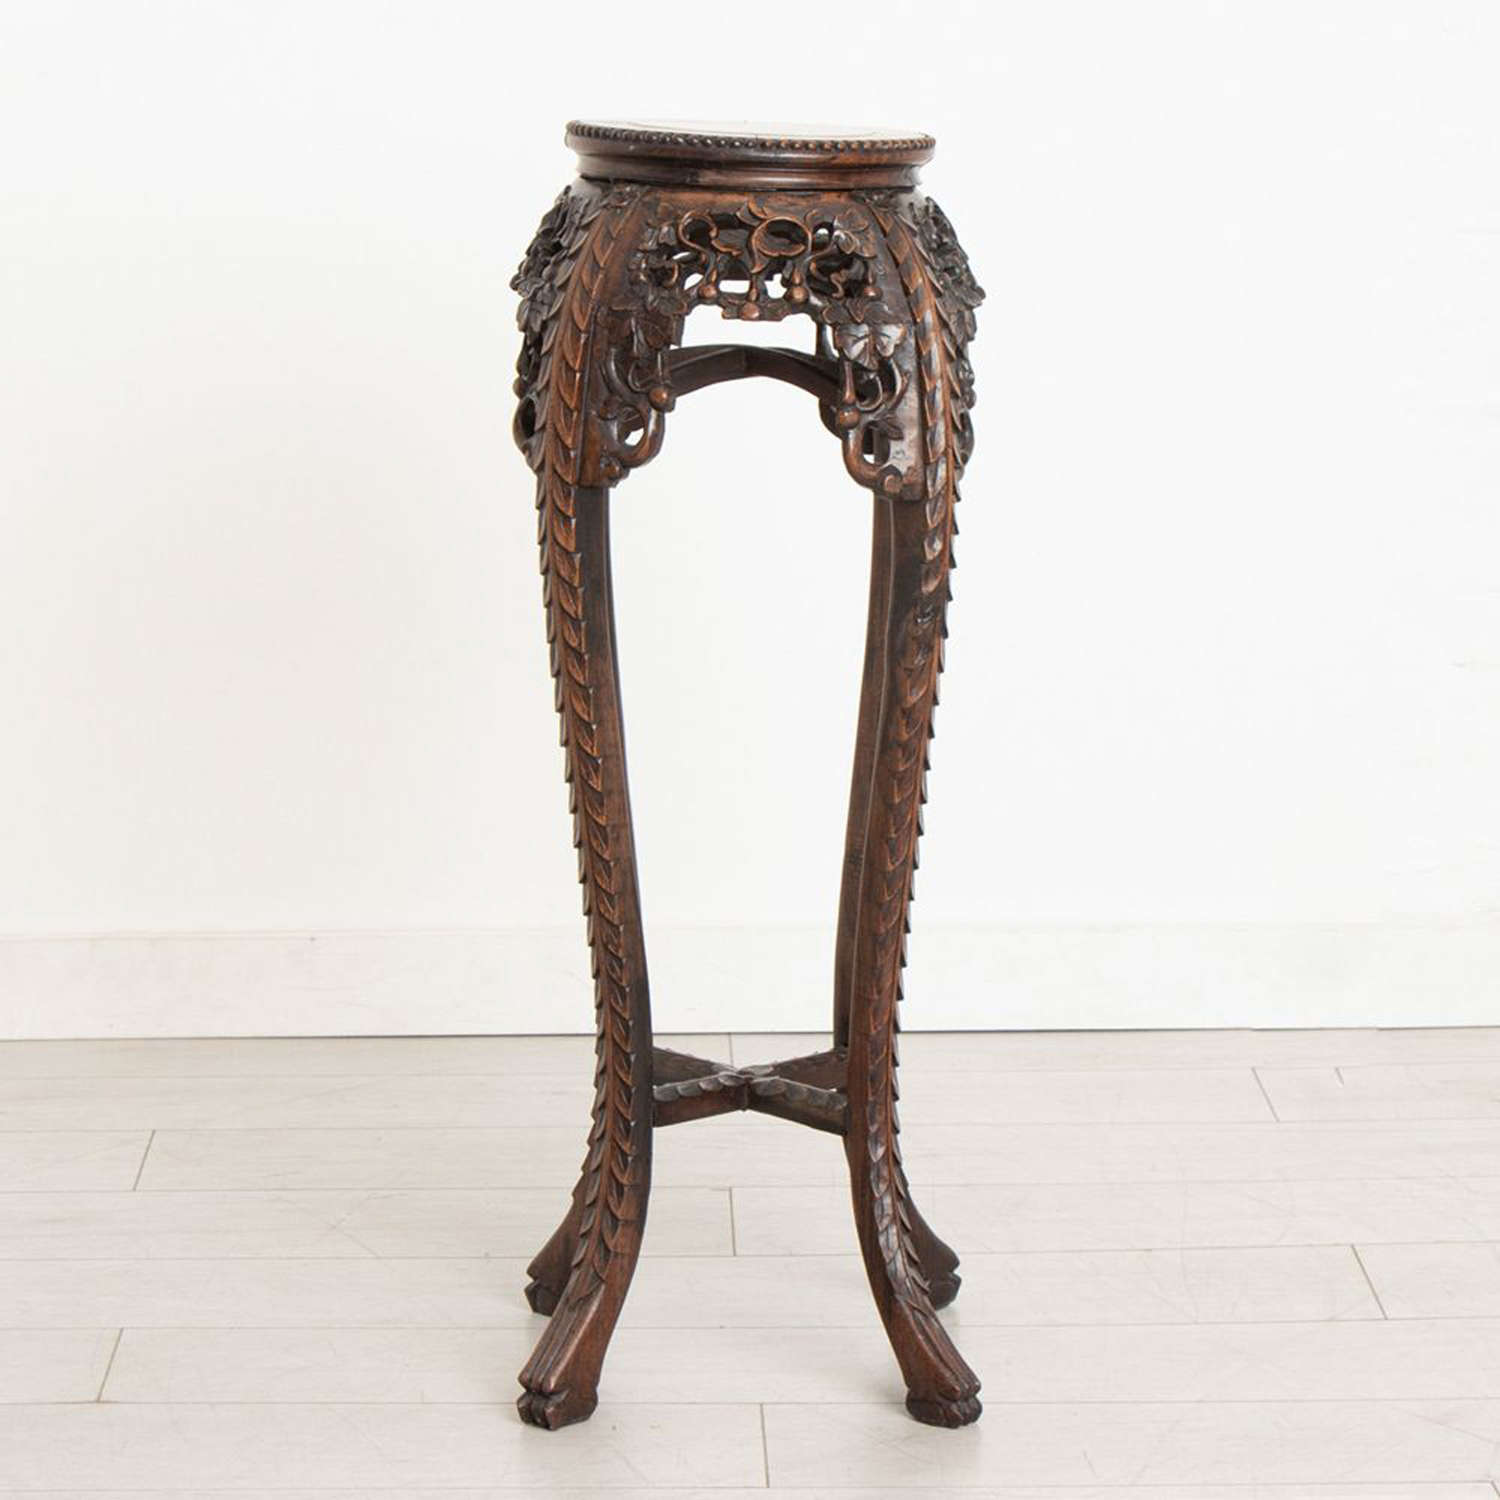 Antique Chinese Carved Wooden Plant Stand with Marble Inset c.1900